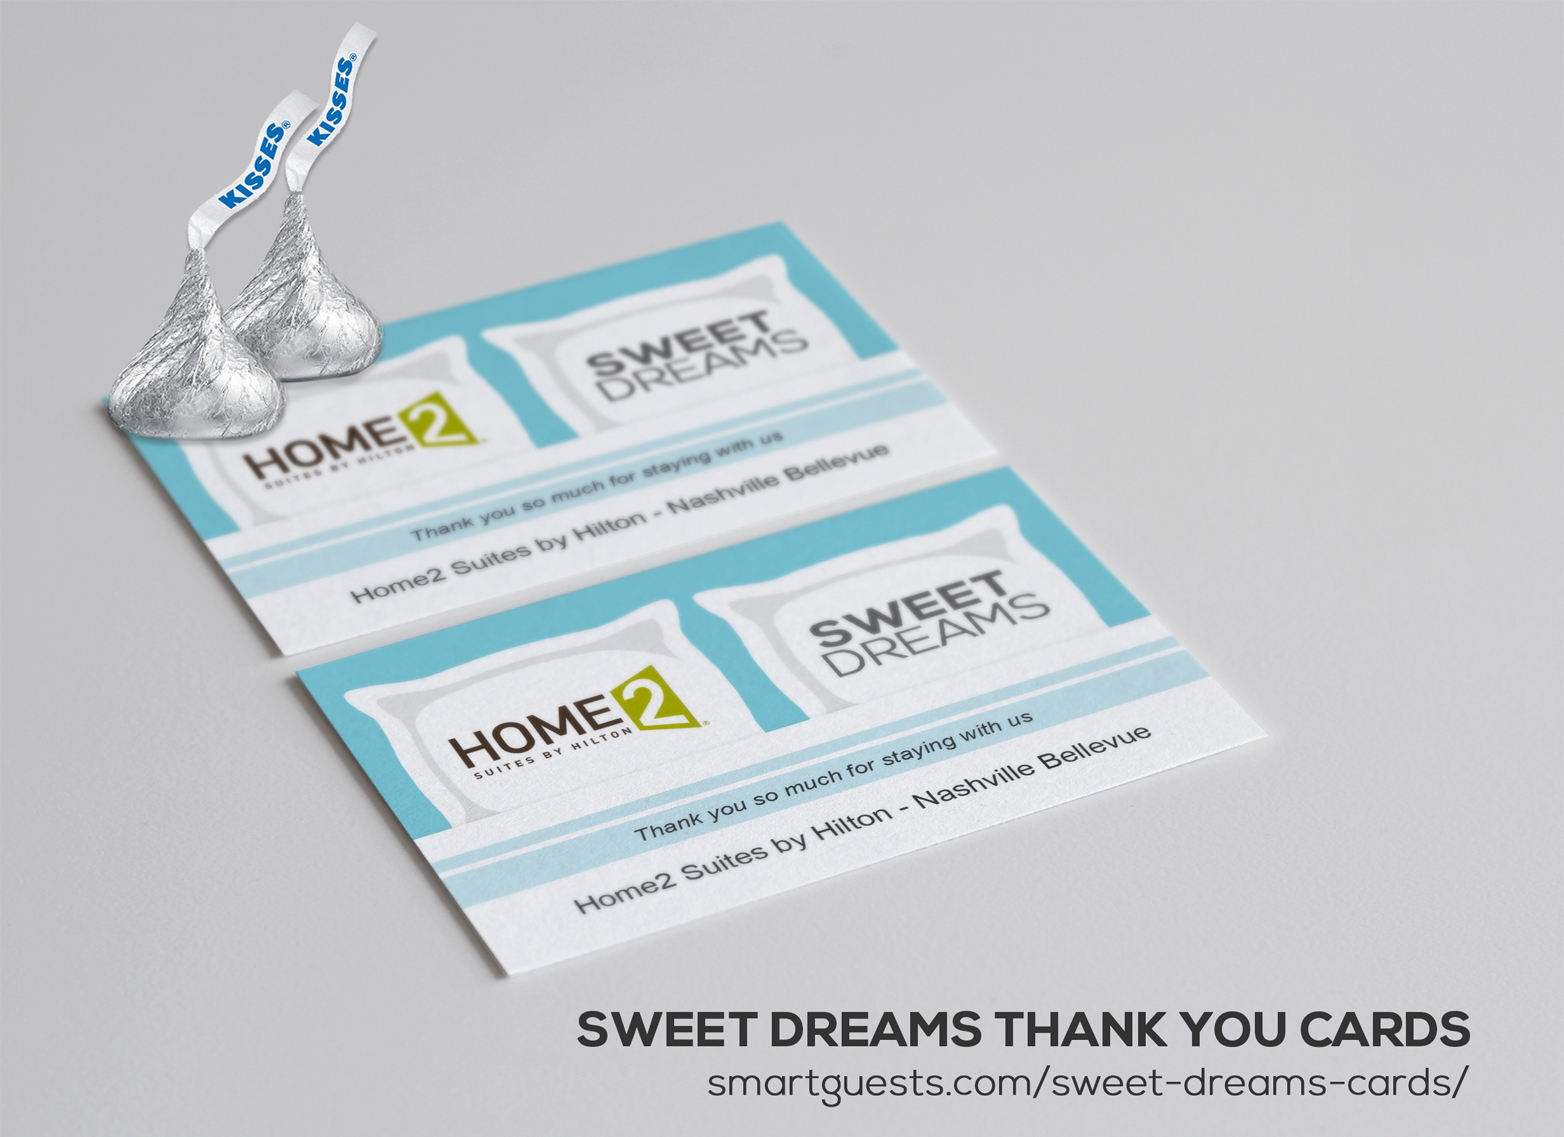 https://smartguests.com/images/products_gallery_images/sweet_dream_thank_you_card.jpg